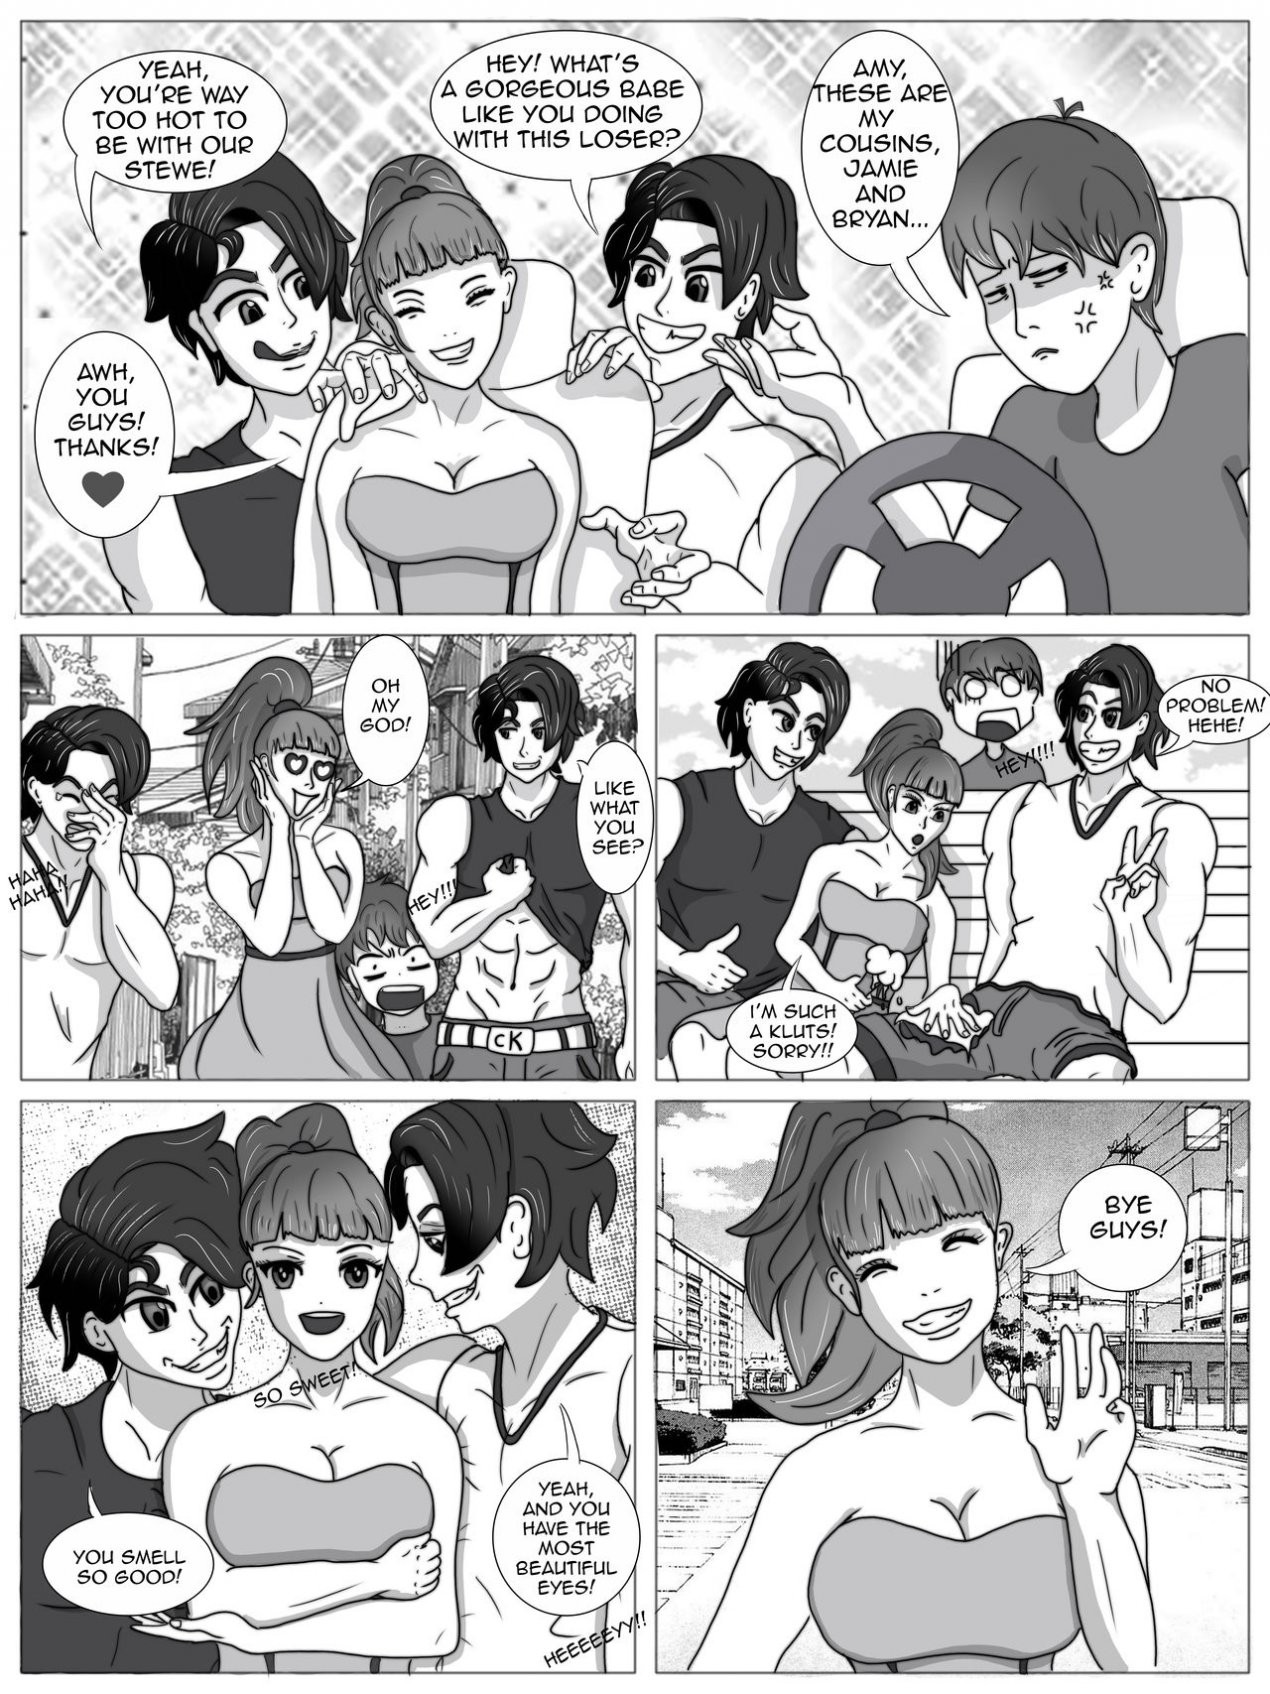 The twins and me porn comic picture 10